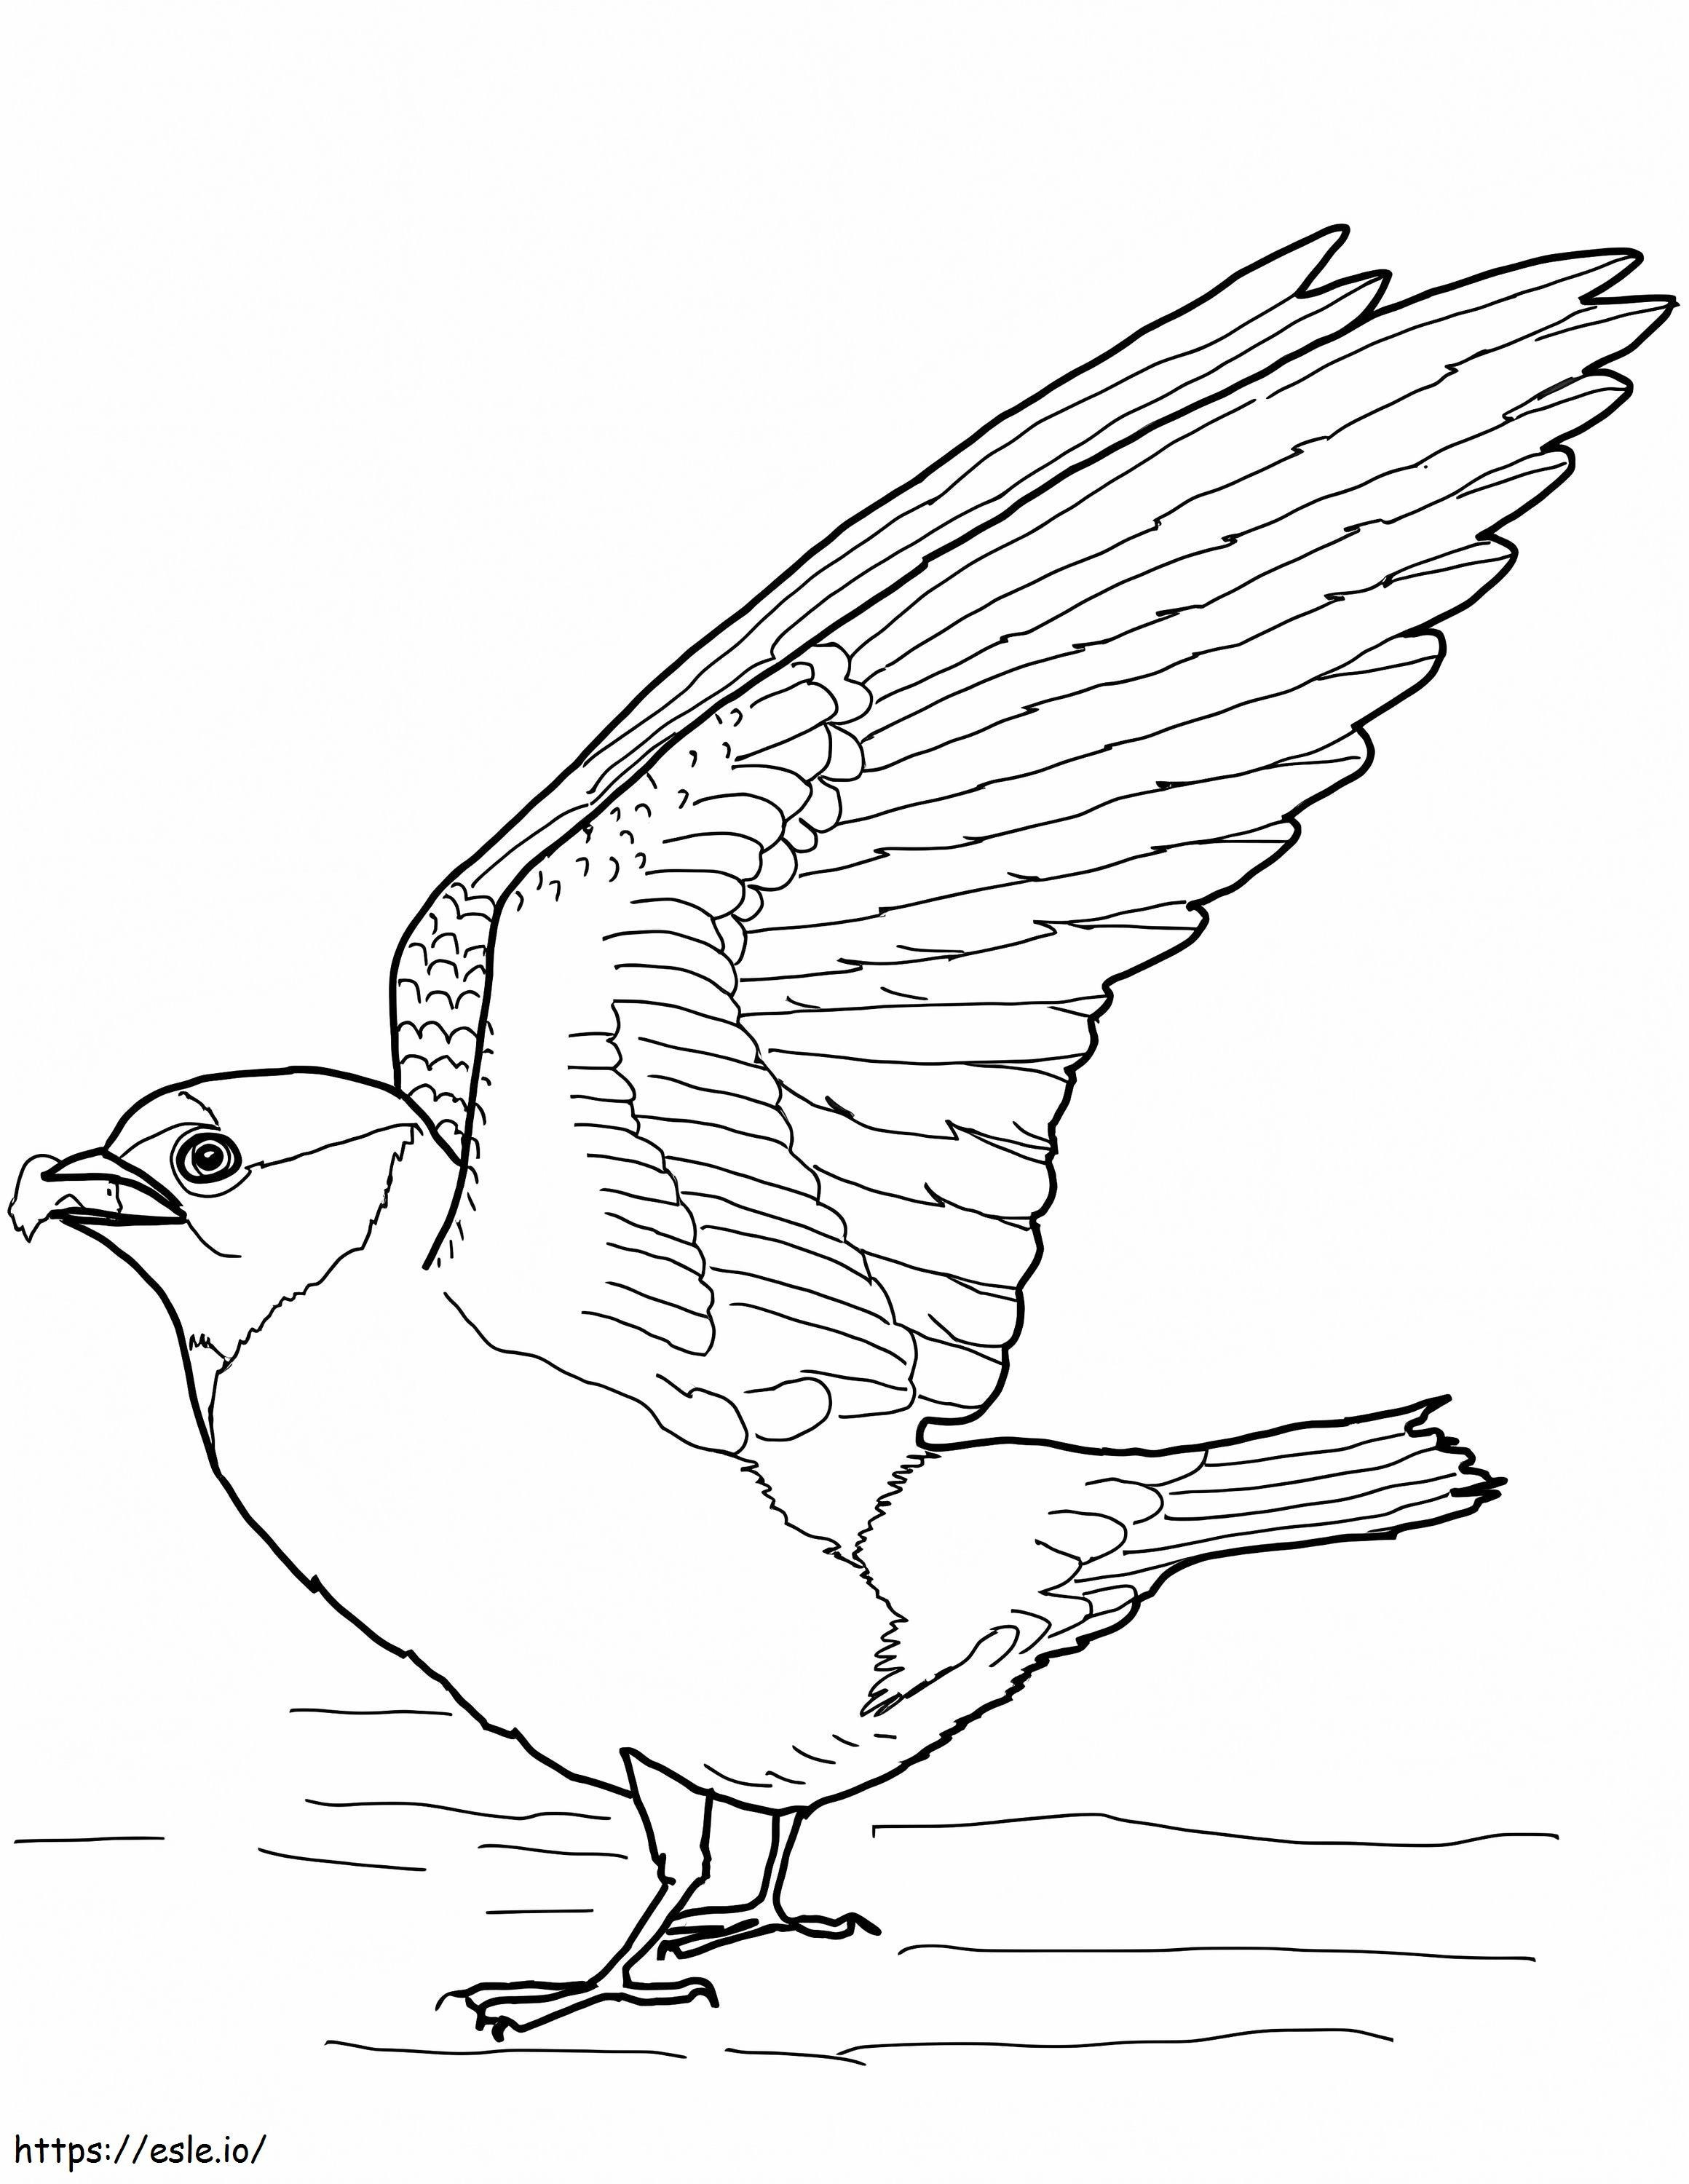 Cliff Swallow 1 coloring page